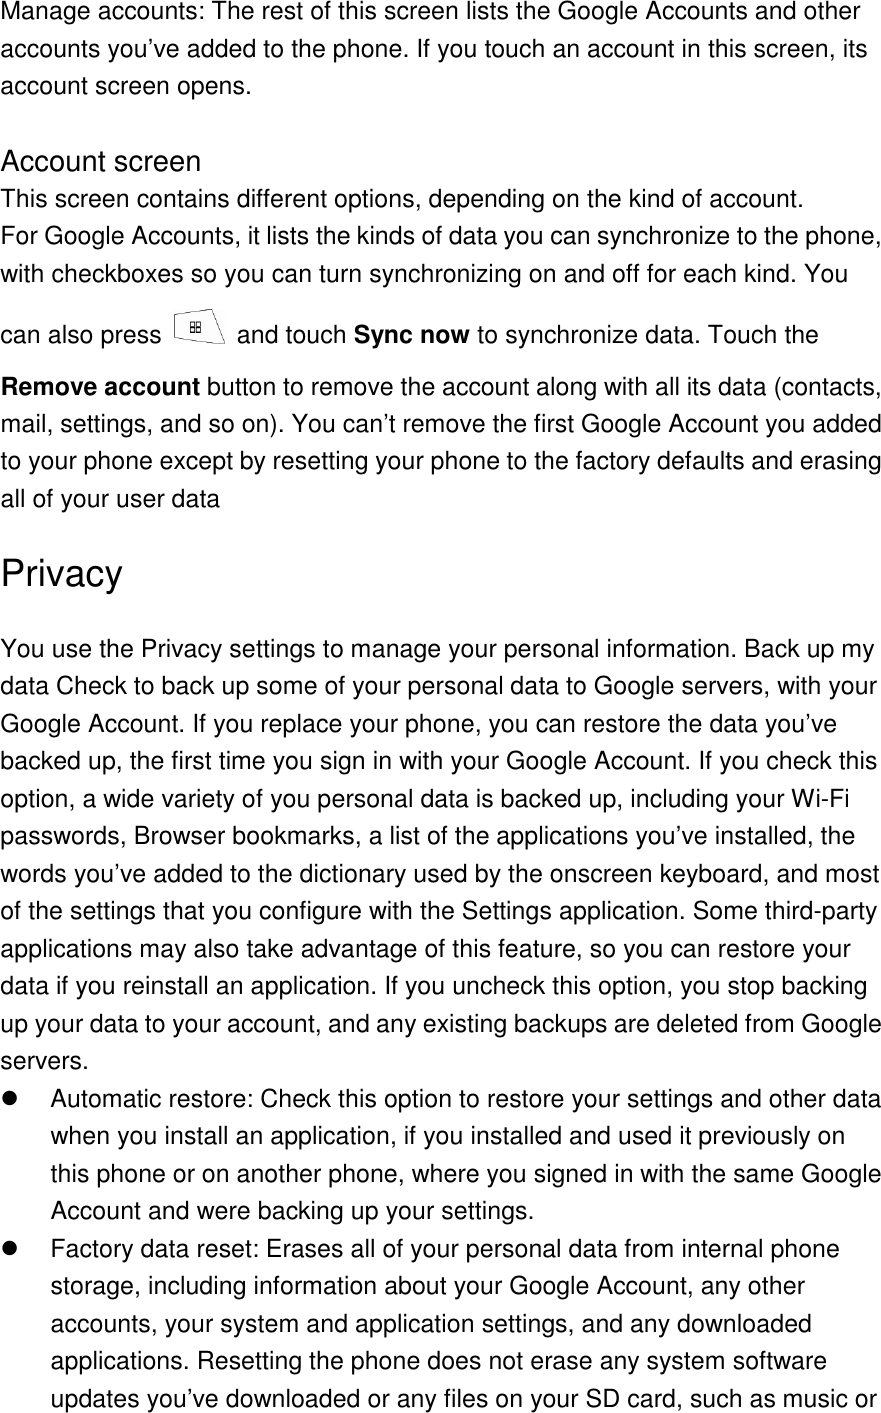 Manage accounts: The rest of this screen lists the Google Accounts and other accounts you’ve added to the phone. If you touch an account in this screen, its account screen opens.  Account screen This screen contains different options, depending on the kind of account. For Google Accounts, it lists the kinds of data you can synchronize to the phone, with checkboxes so you can turn synchronizing on and off for each kind. You can also press    and touch Sync now to synchronize data. Touch the Remove account button to remove the account along with all its data (contacts, mail, settings, and so on). You can’t remove the first Google Account you added to your phone except by resetting your phone to the factory defaults and erasing all of your user data Privacy You use the Privacy settings to manage your personal information. Back up my data Check to back up some of your personal data to Google servers, with your Google Account. If you replace your phone, you can restore the data you’ve backed up, the first time you sign in with your Google Account. If you check this option, a wide variety of you personal data is backed up, including your Wi-Fi passwords, Browser bookmarks, a list of the applications you’ve installed, the words you’ve added to the dictionary used by the onscreen keyboard, and most of the settings that you configure with the Settings application. Some third-party applications may also take advantage of this feature, so you can restore your data if you reinstall an application. If you uncheck this option, you stop backing up your data to your account, and any existing backups are deleted from Google servers.   Automatic restore: Check this option to restore your settings and other data when you install an application, if you installed and used it previously on this phone or on another phone, where you signed in with the same Google Account and were backing up your settings.   Factory data reset: Erases all of your personal data from internal phone storage, including information about your Google Account, any other accounts, your system and application settings, and any downloaded applications. Resetting the phone does not erase any system software updates you’ve downloaded or any files on your SD card, such as music or 